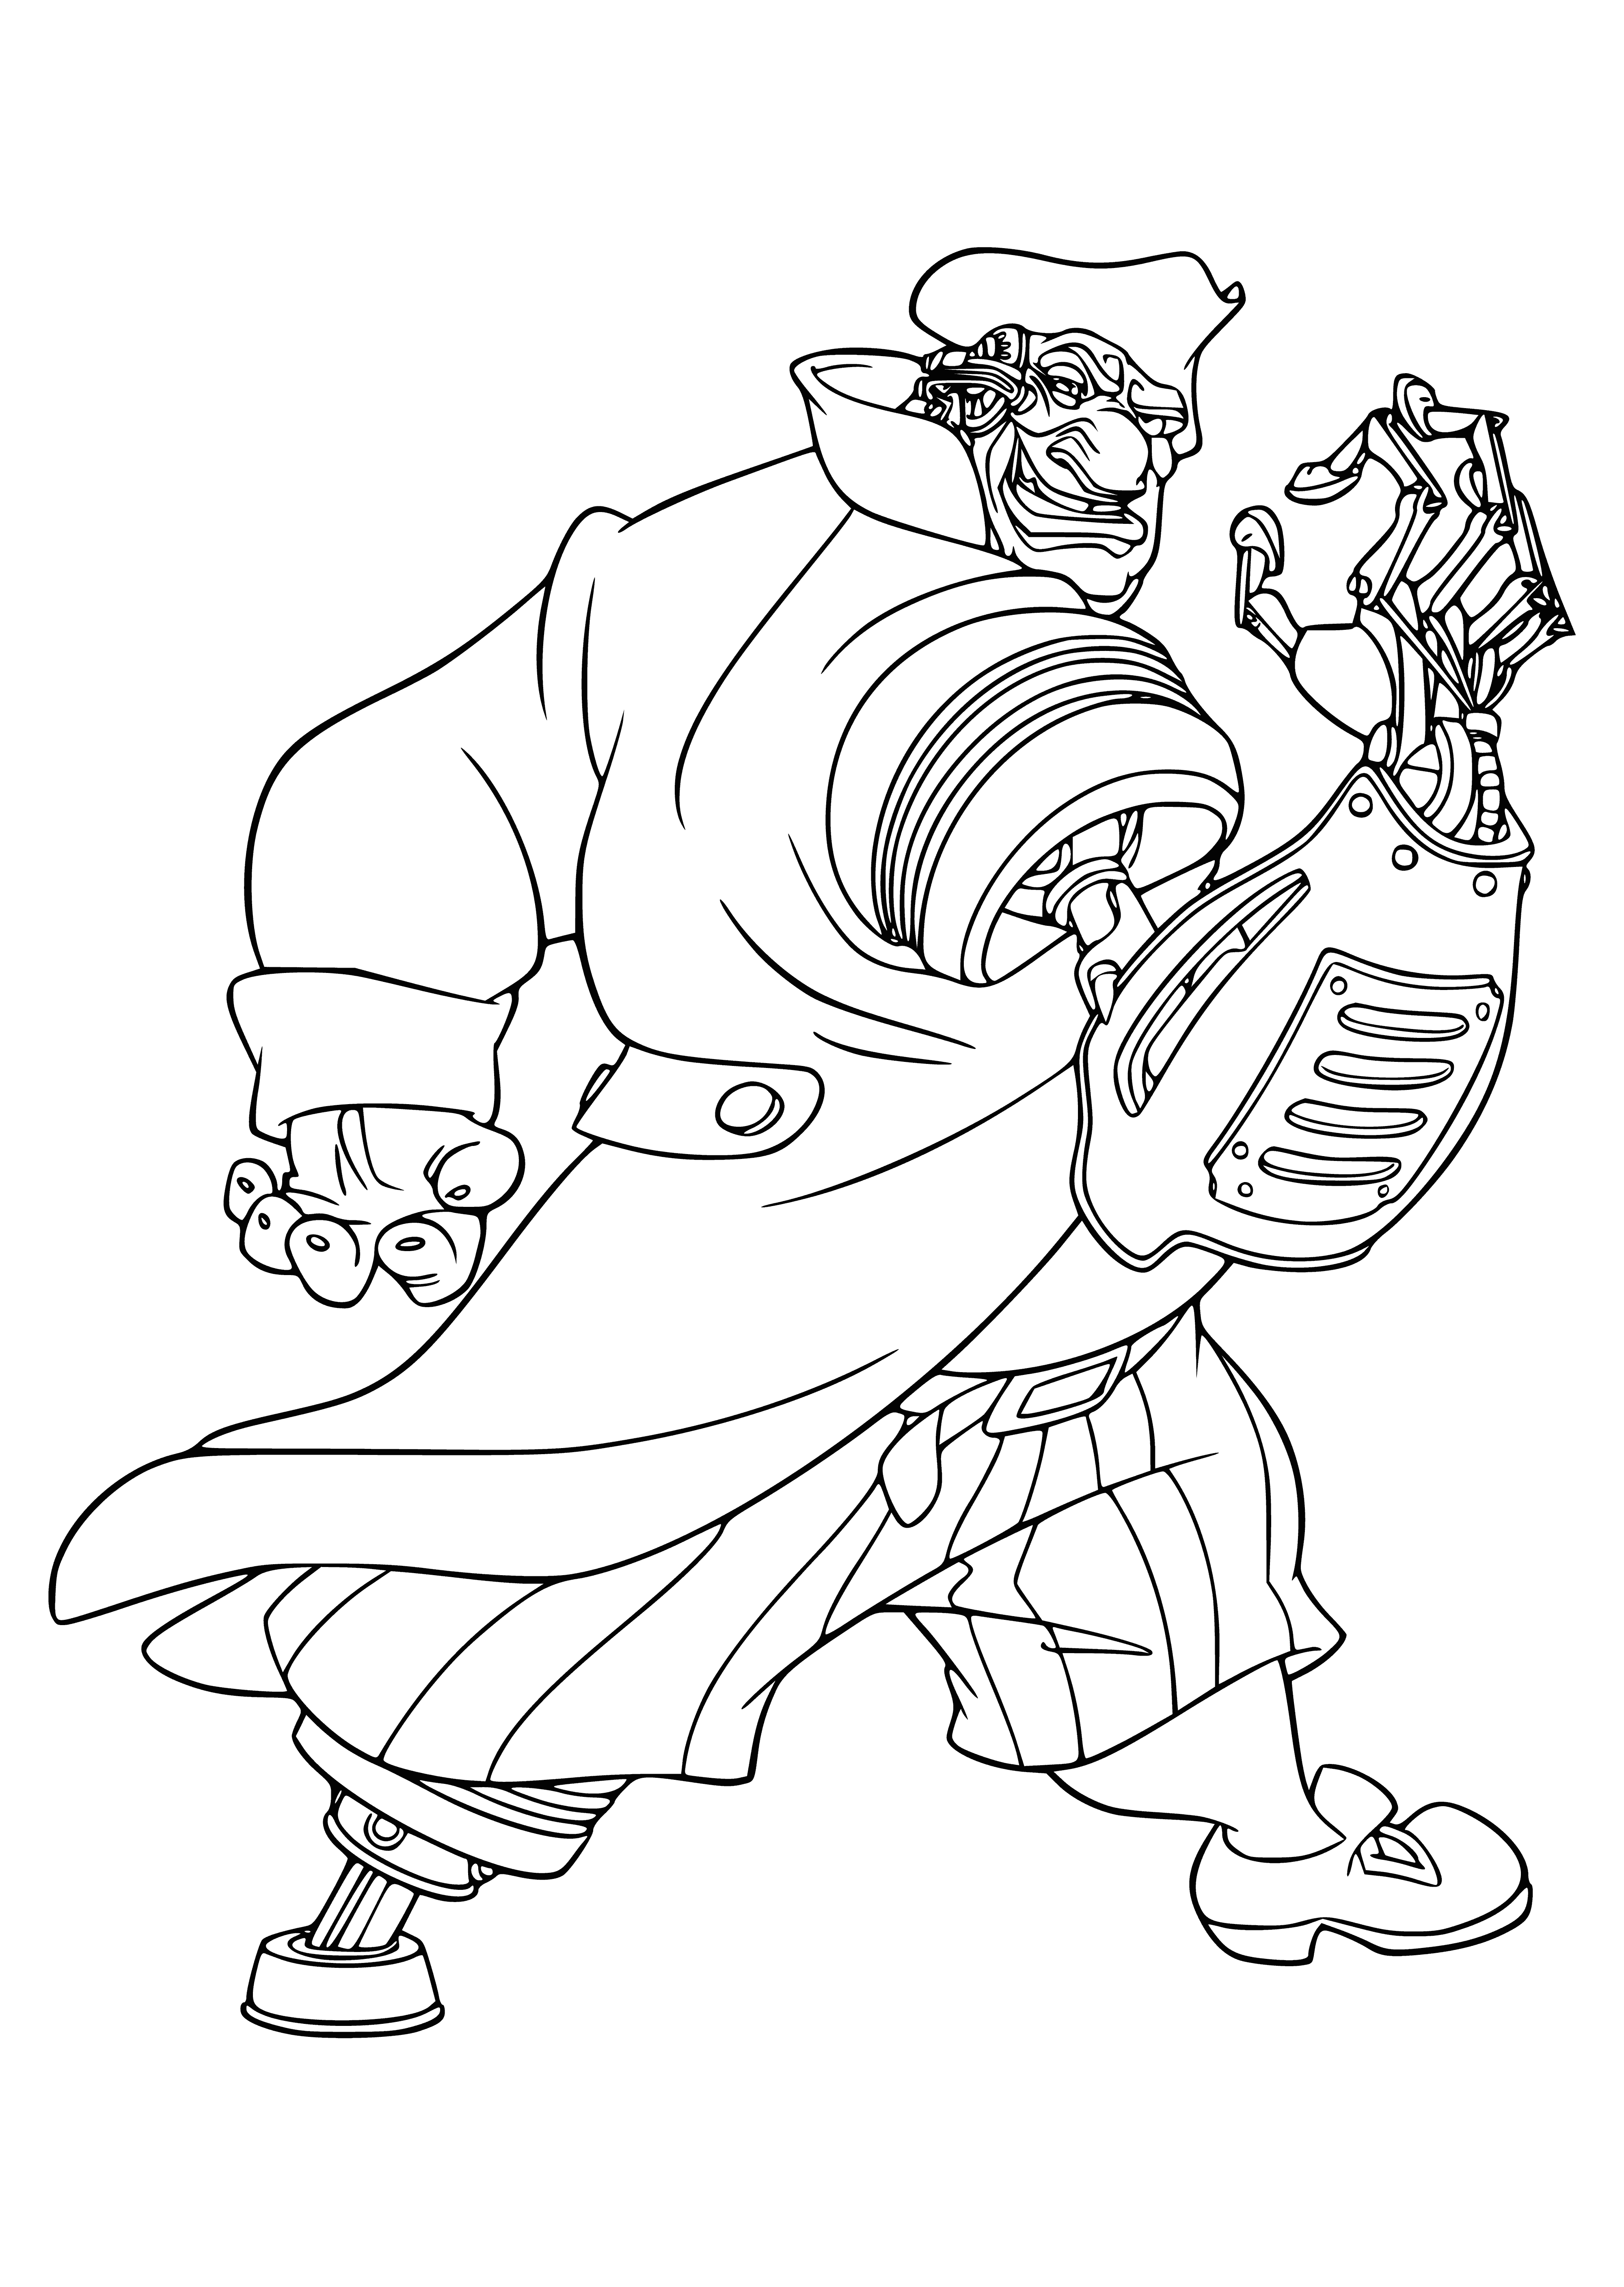 coloring page: Cyborg stands in a room w/treasure chest in mechanical hand. Left eye is cybernetic, large scar on right side. Wearing black/silver armor, helmet tucked under arm. #cyborg